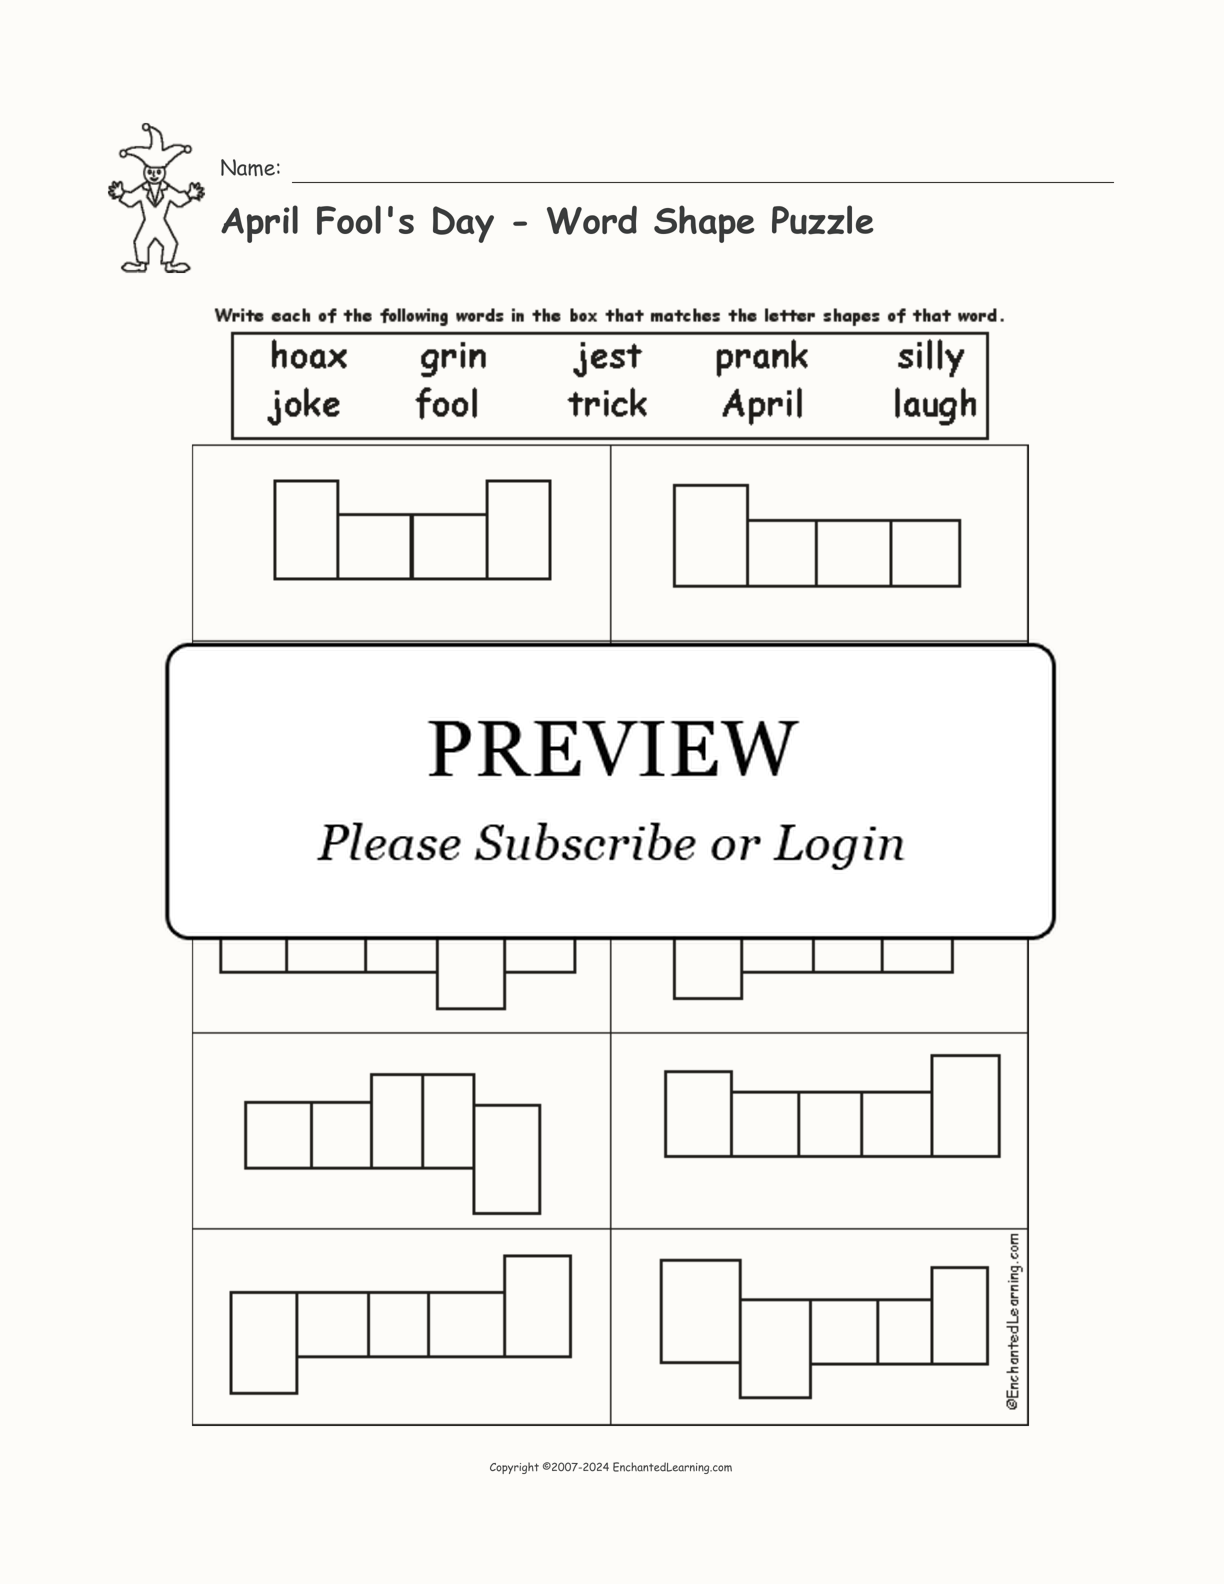 April Fool's Day - Word Shape Puzzle interactive worksheet page 1